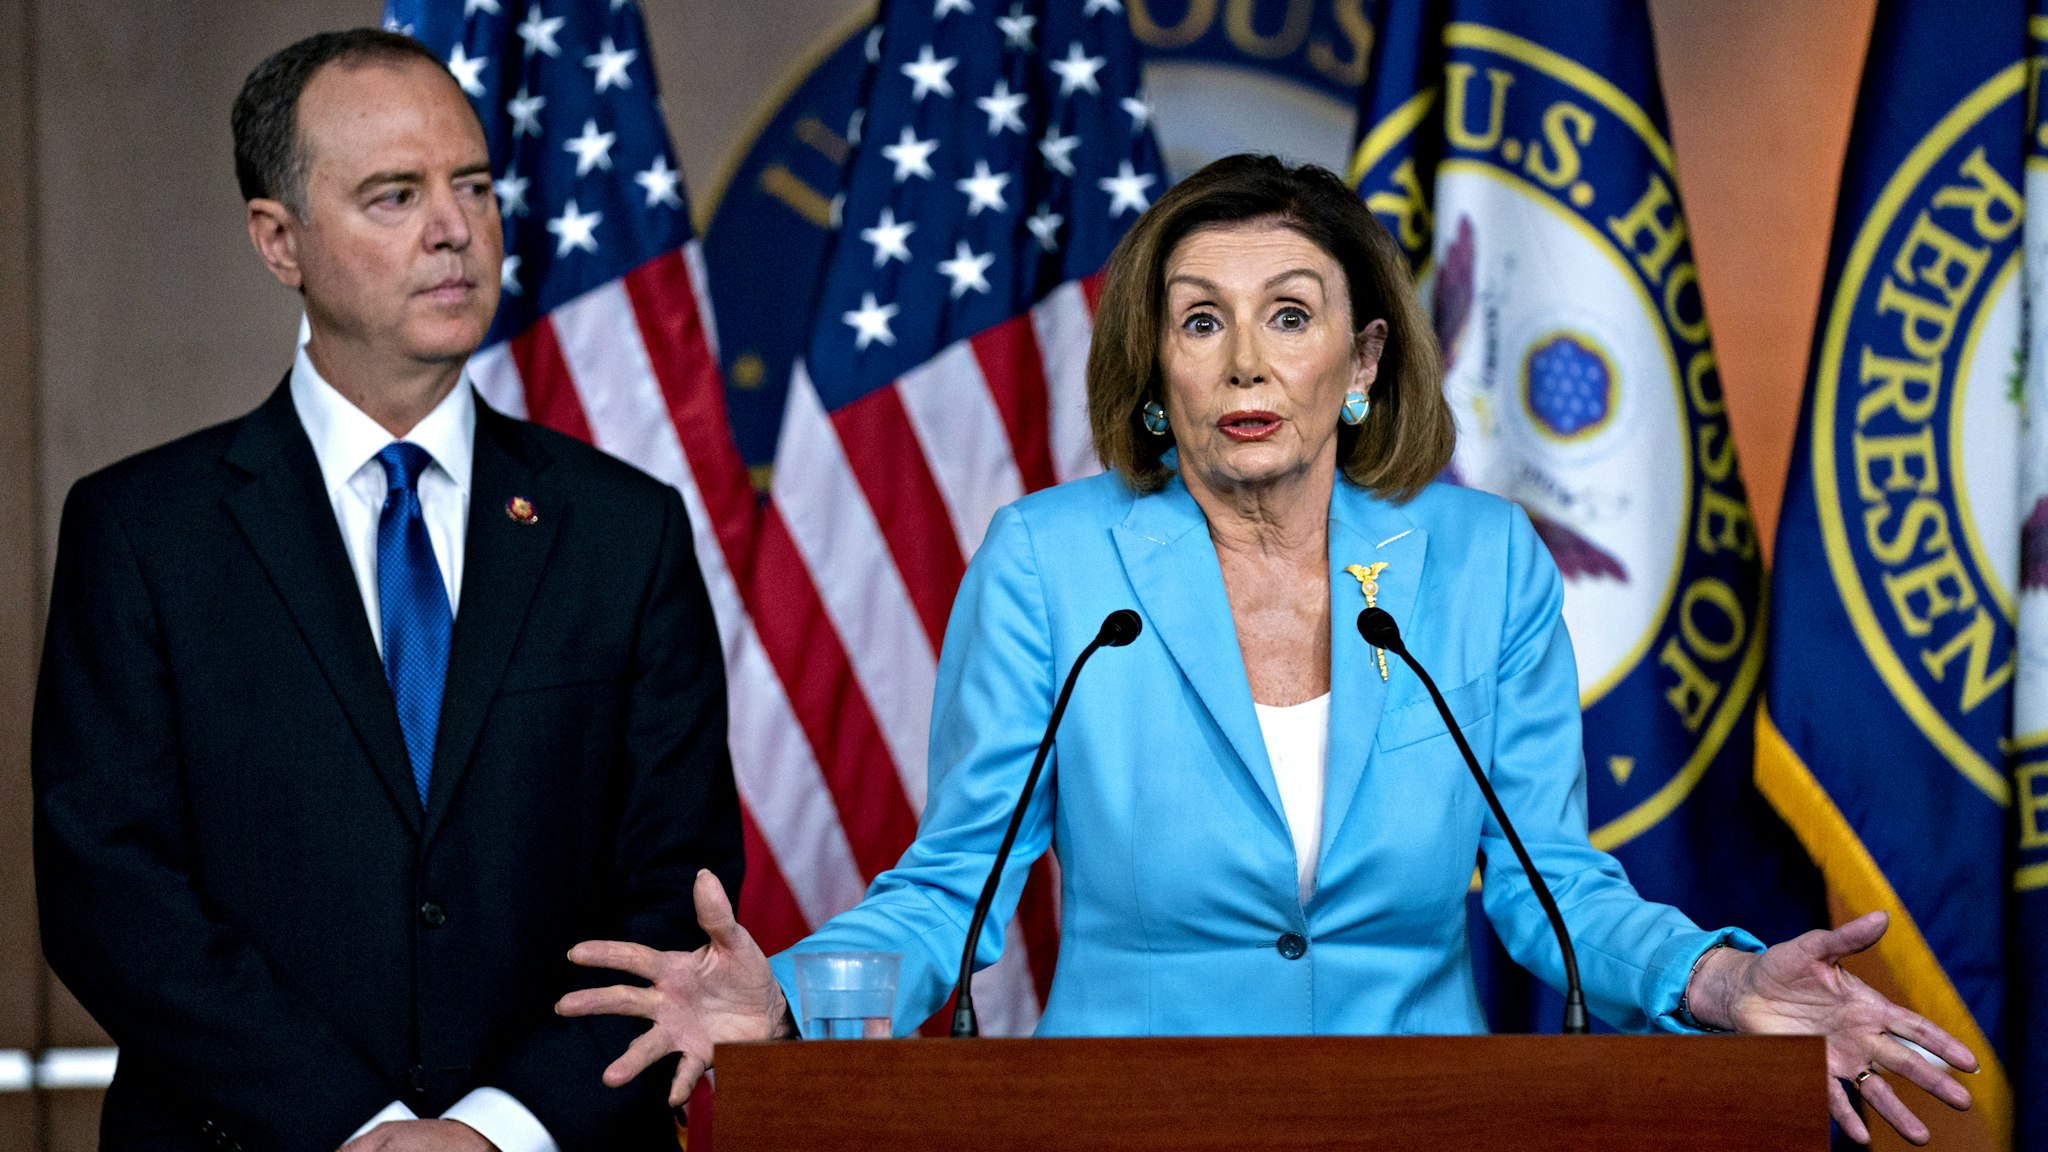 U.S. House Speaker Nancy Pelosi, a Democrat from California, speaks as Representative Adam Schiff, a Democrat from California and chairman of the House Intelligence Committee, left, listens during a news conference on Capitol Hill in Washington, D.C., U.S., on Wednesday, Oct. 2, 2019. Three House committee chairmen threatened on Wednesday to subpoena the White House if it fails to adhere by Friday to document requests related to allegations that President Donald Trump pressured Ukraine into investigating one of his leading political rivals.